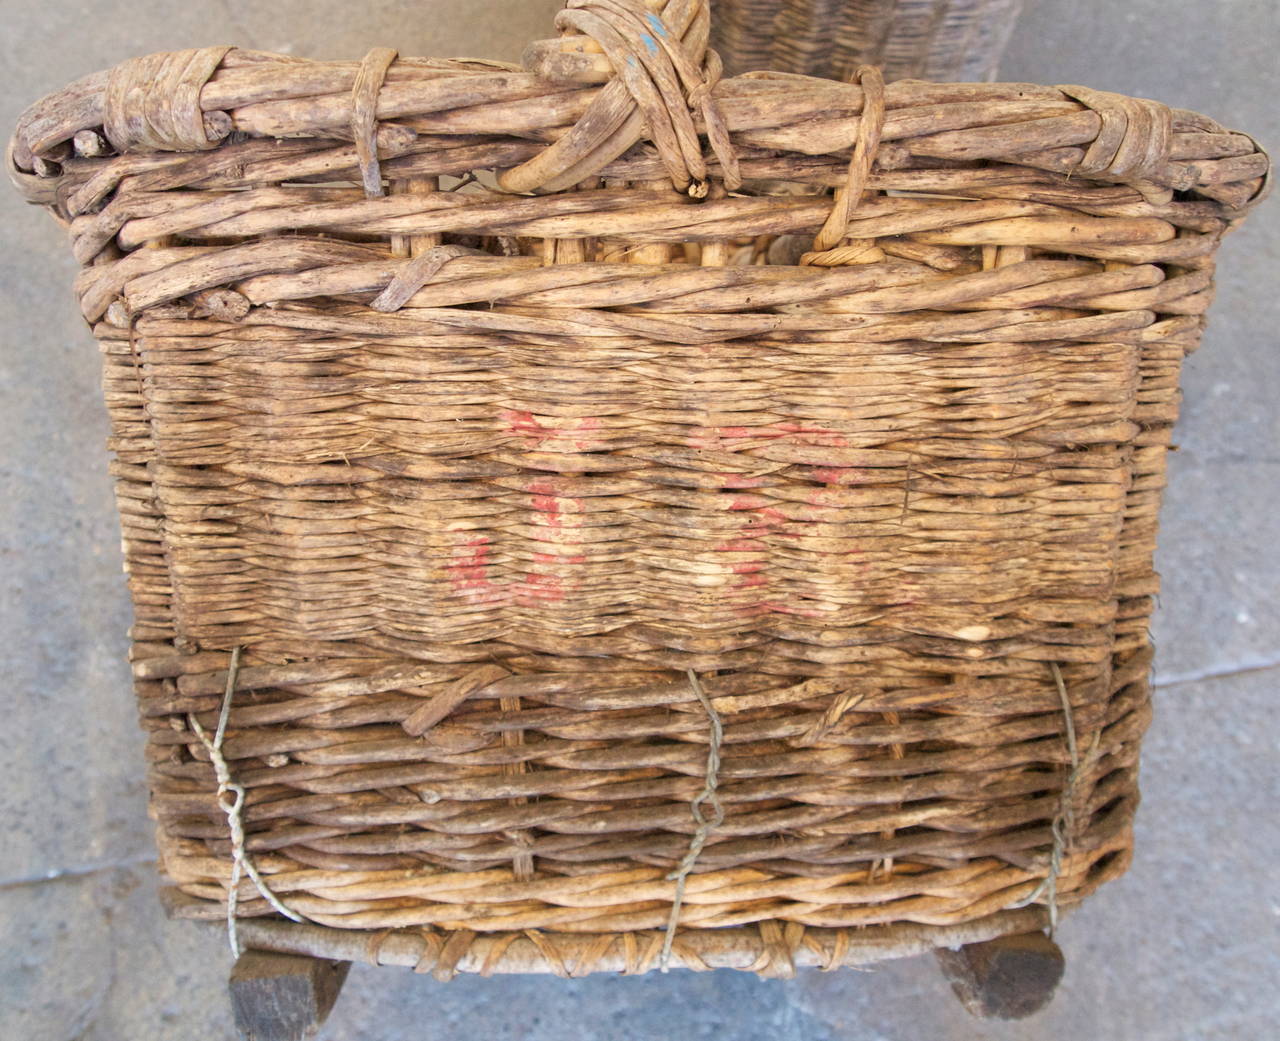 Woven Pair of 19th c. French Basketwork Bottle Holders